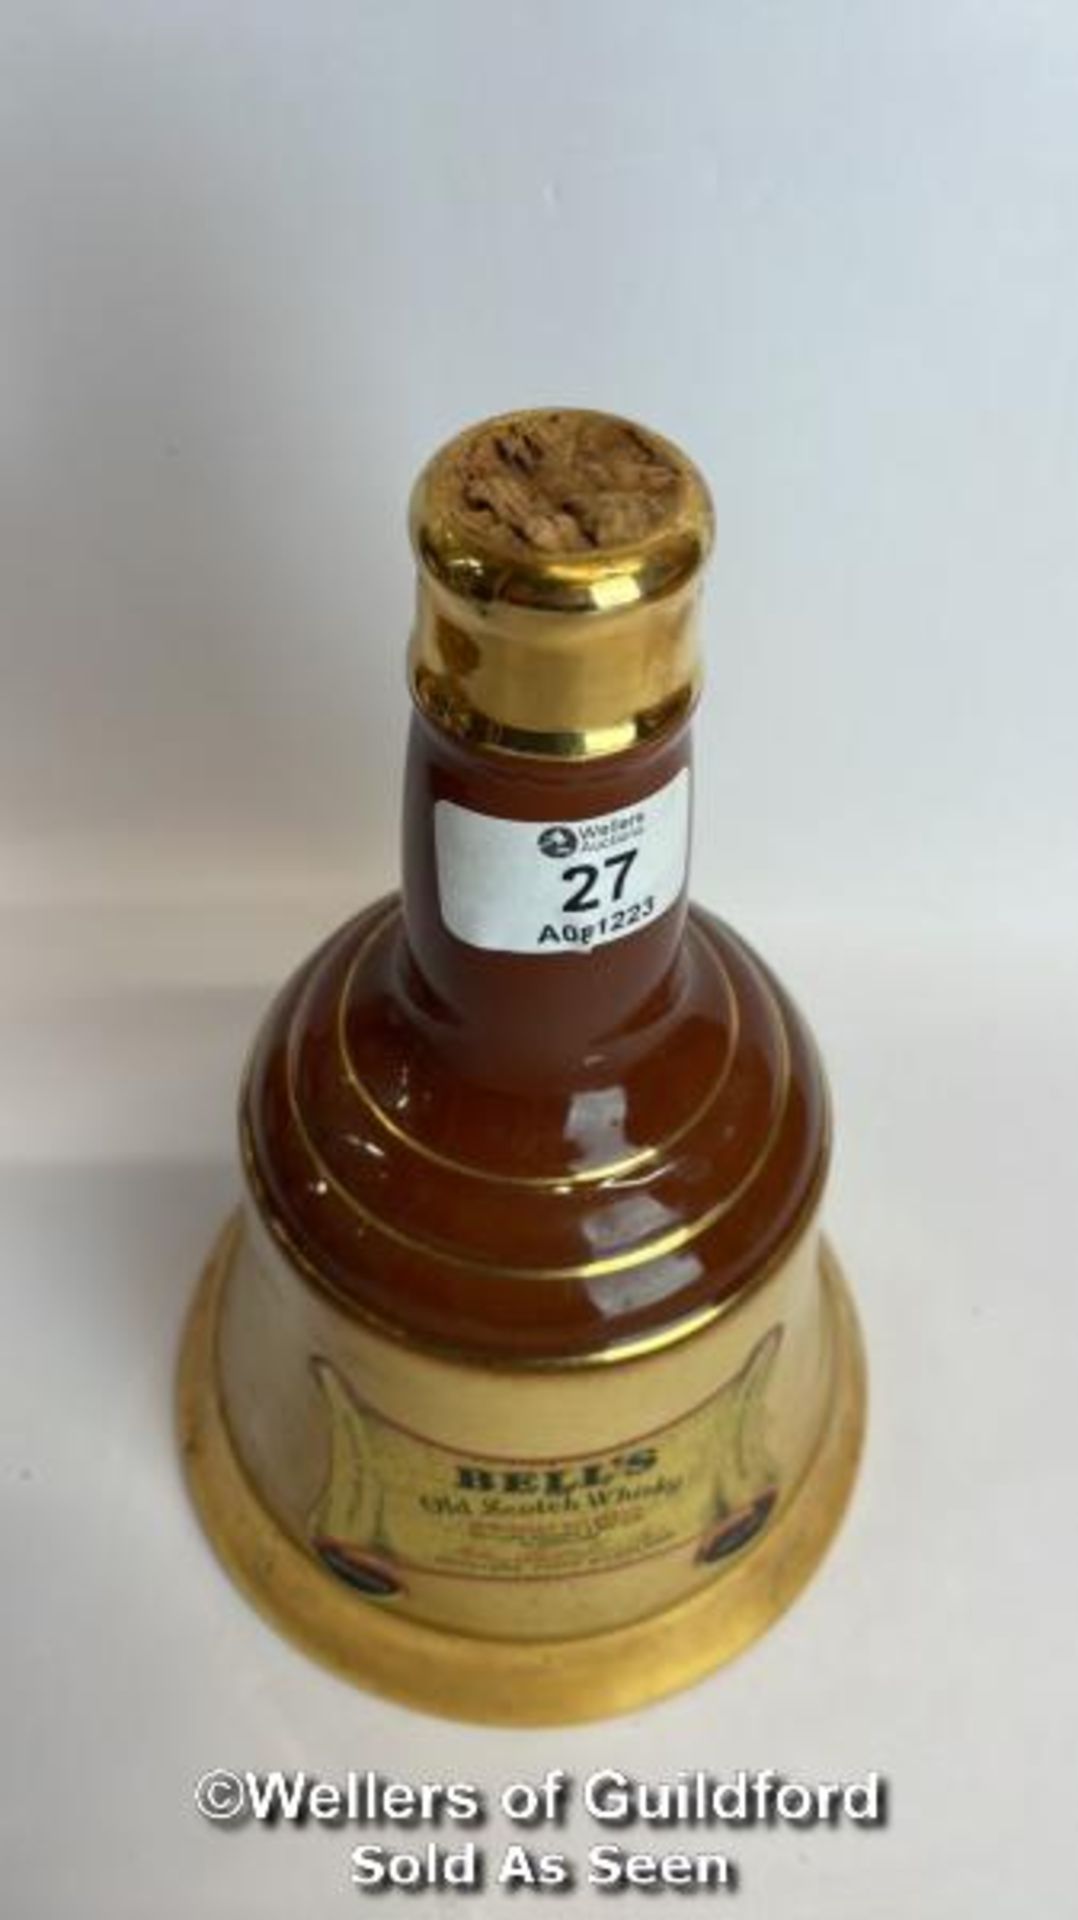 Bell's Specially Selected Blended Scotch Whisky, Bottle made by Wade, 26.5 OZ, 40% vol / Please - Image 10 of 10